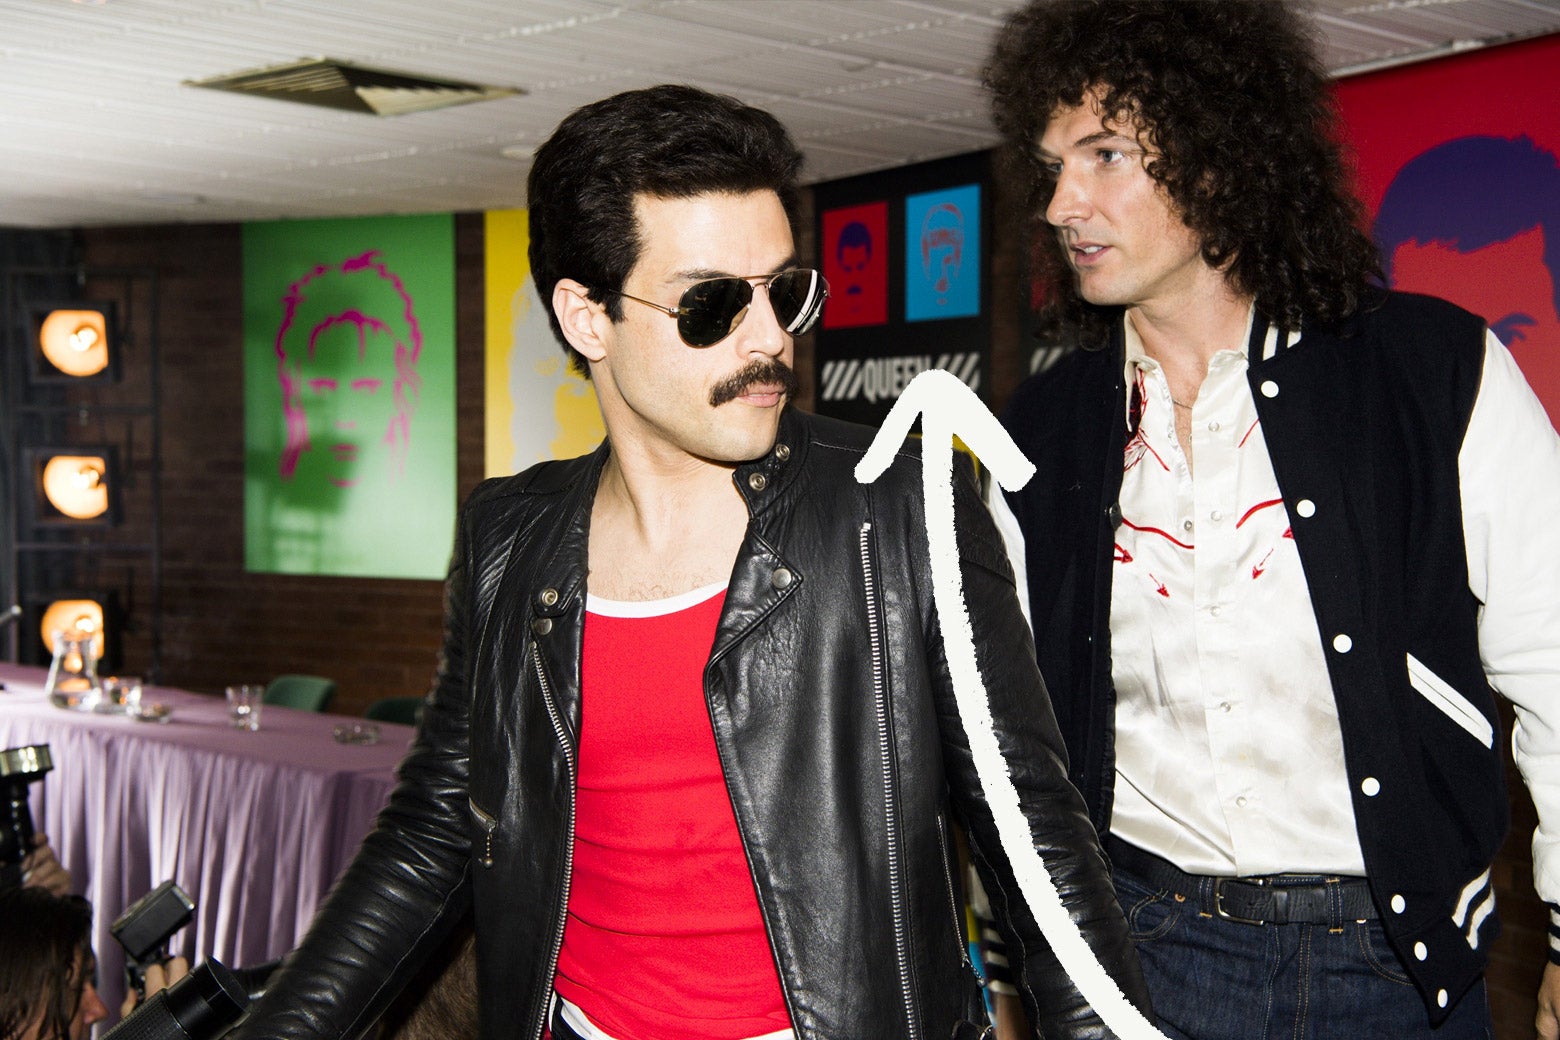 Scene from Bohemian Rhapsody with Hot Space album art in background